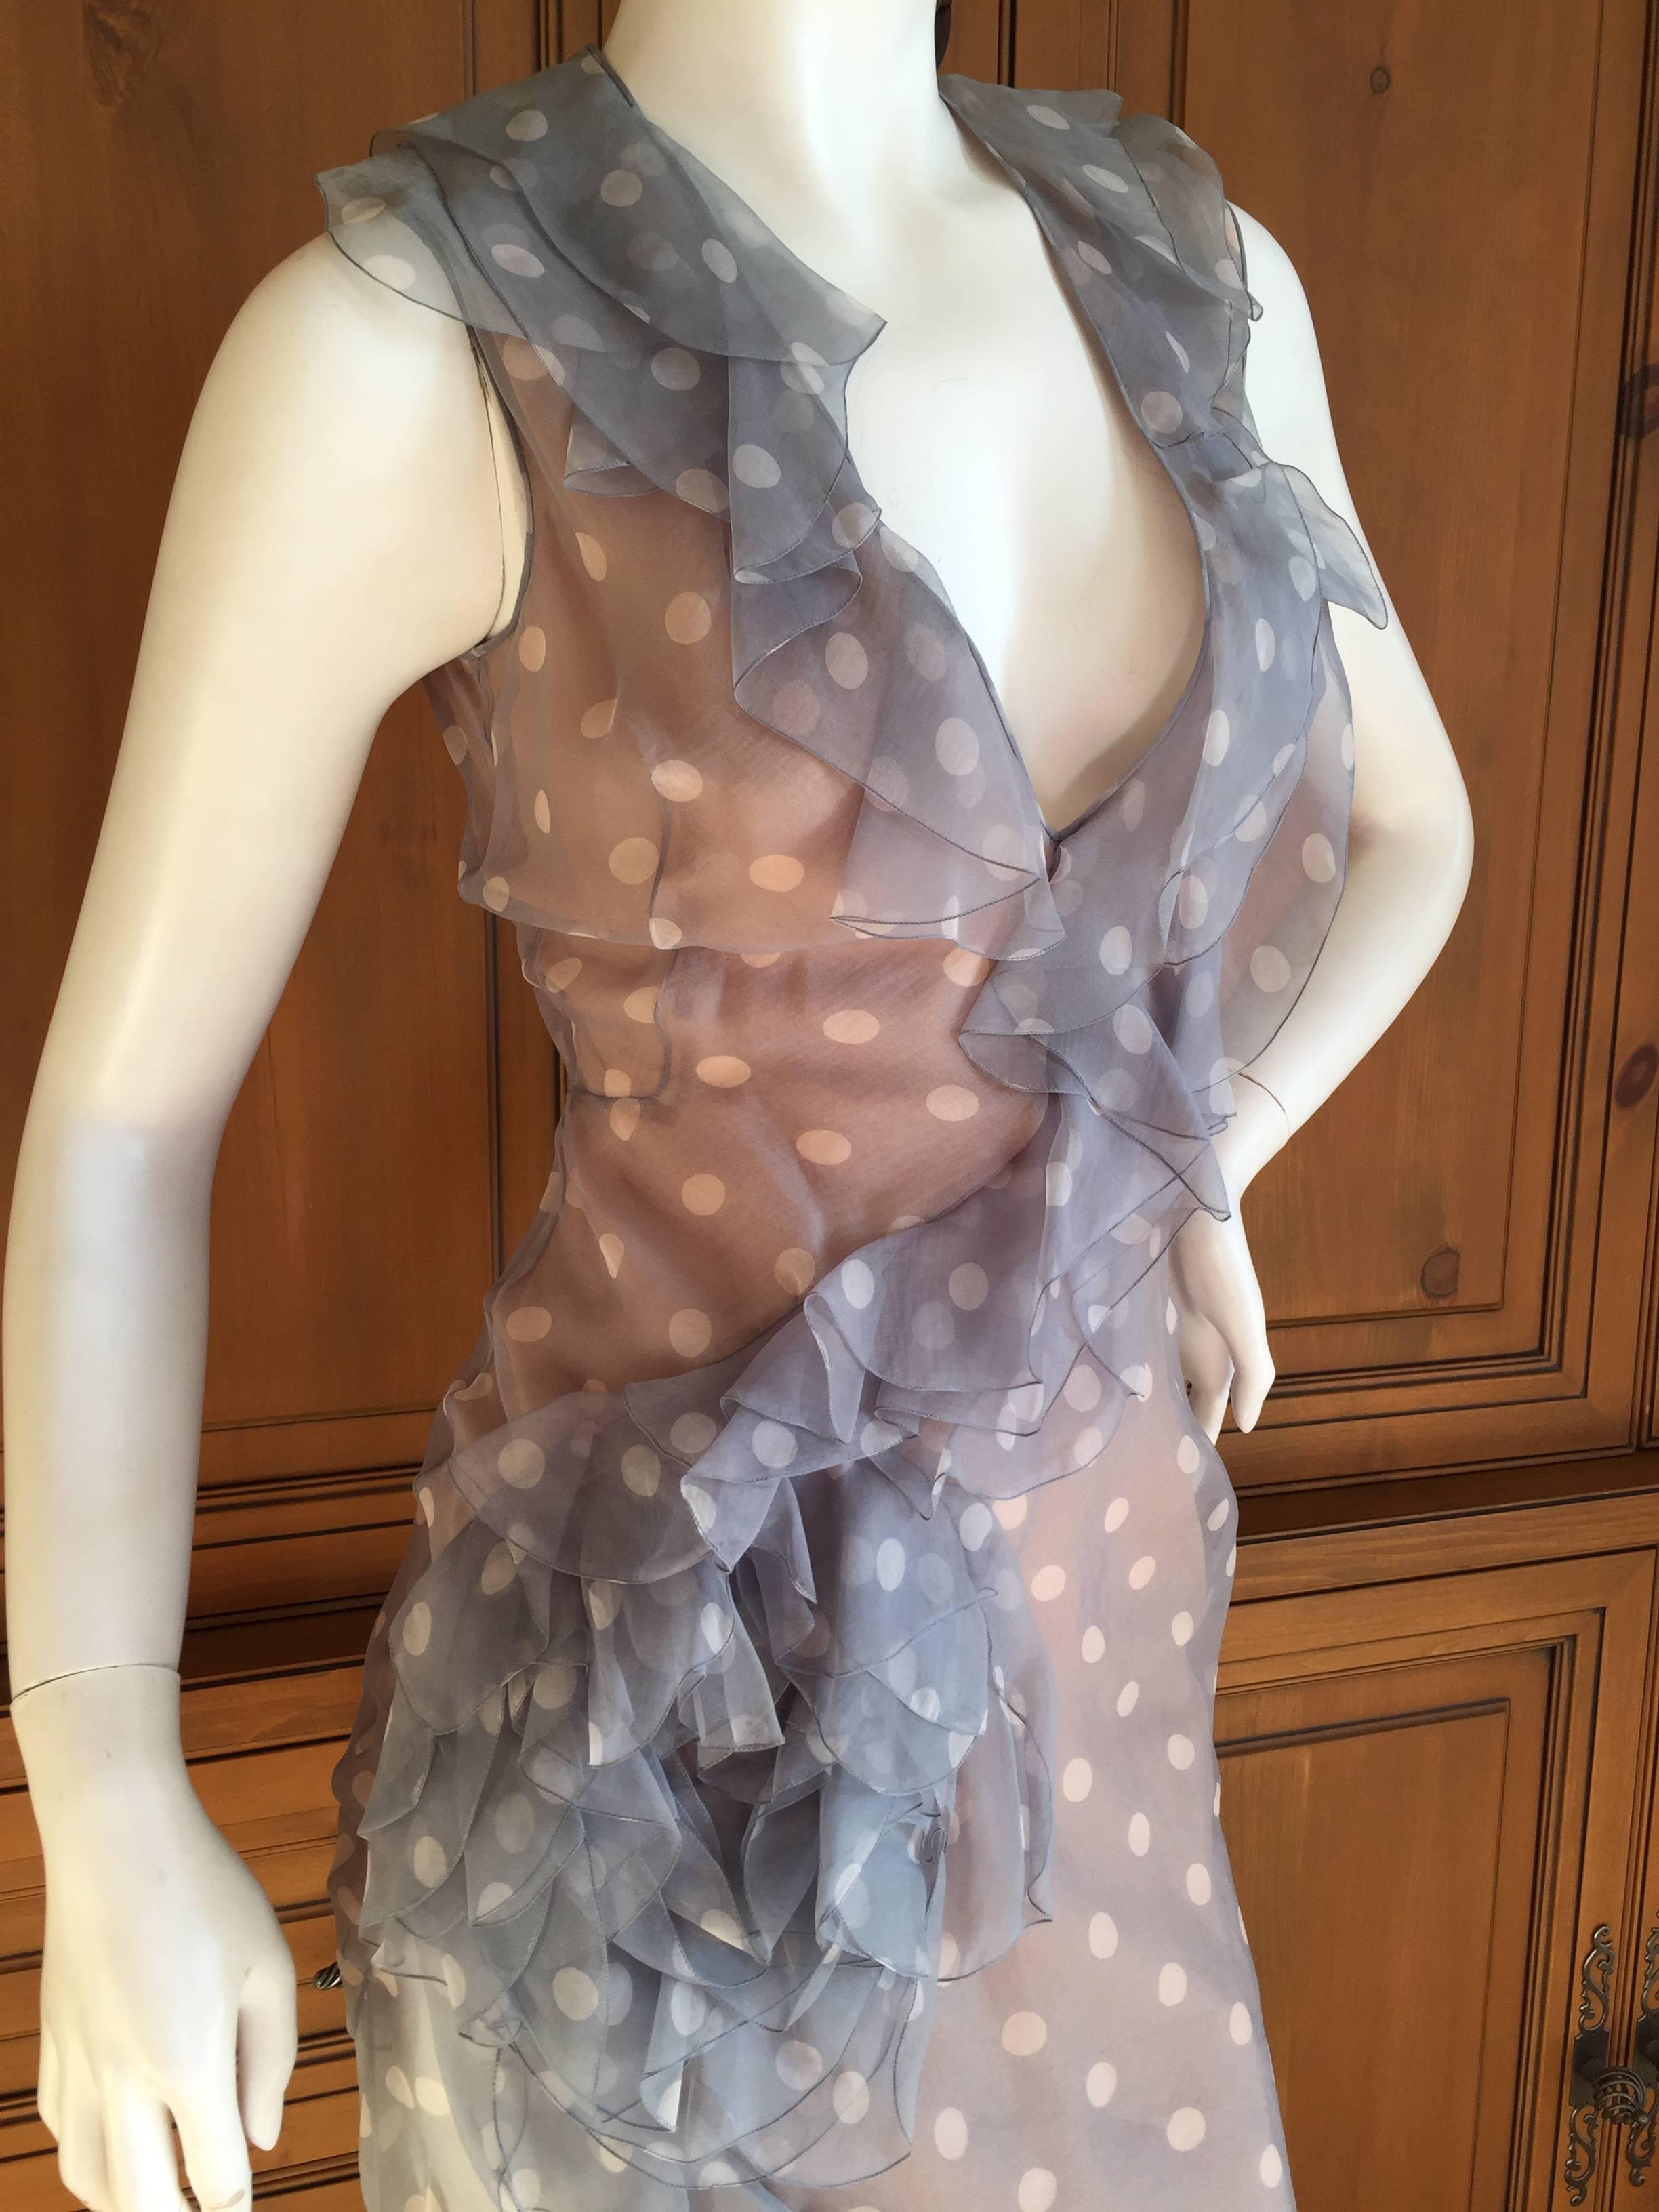 Romantic early John Galliano ruffled dress, unworn, new with tags from Barneys.
Sheer polka dot silk with ruffled flounce , it buttons up the side.
The sheer chiffon silk is lined in some places , sheer in others.
Marked 36 / 6
Bust 39